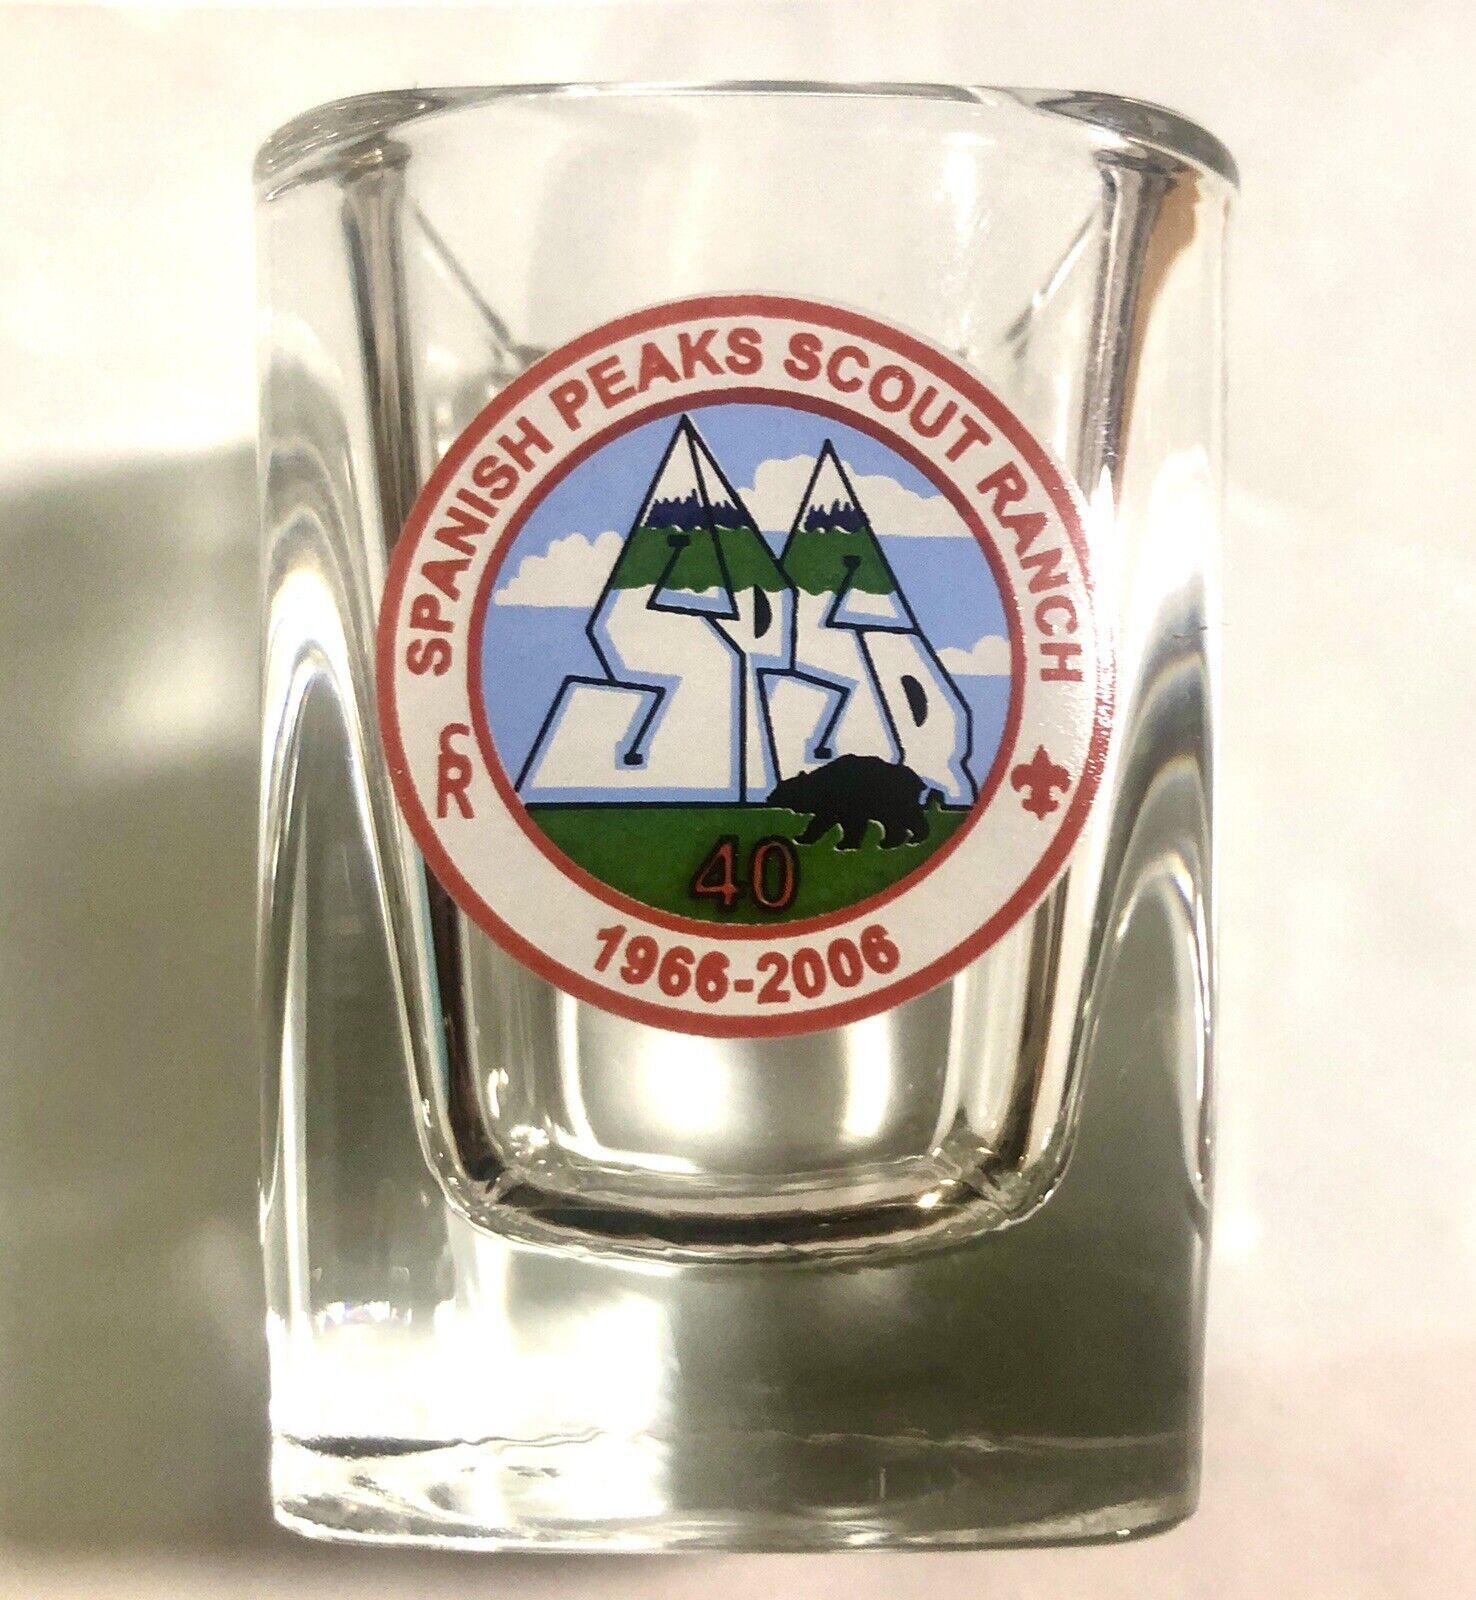 1996-2006 Spanish Peaks Scout Ranch,40 years Boy Scouts Collectible Shot Glass 